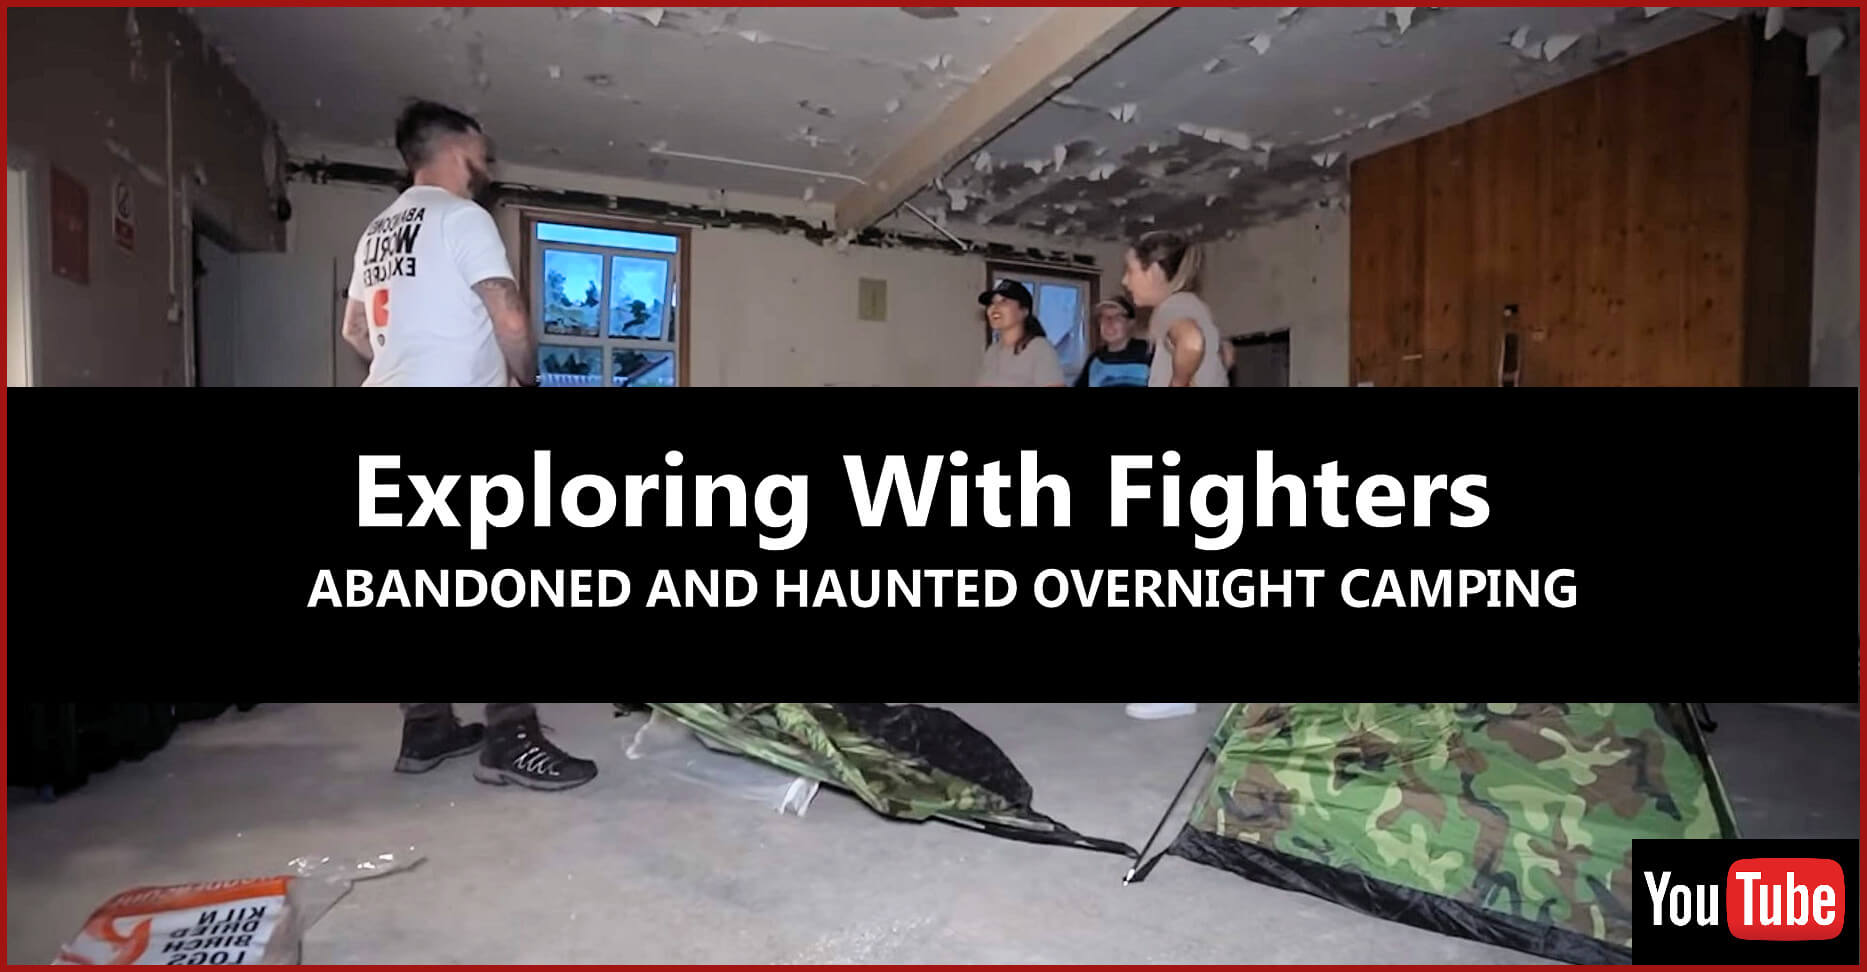 Exploring with Fighters Abandoned Overnight Camping Details